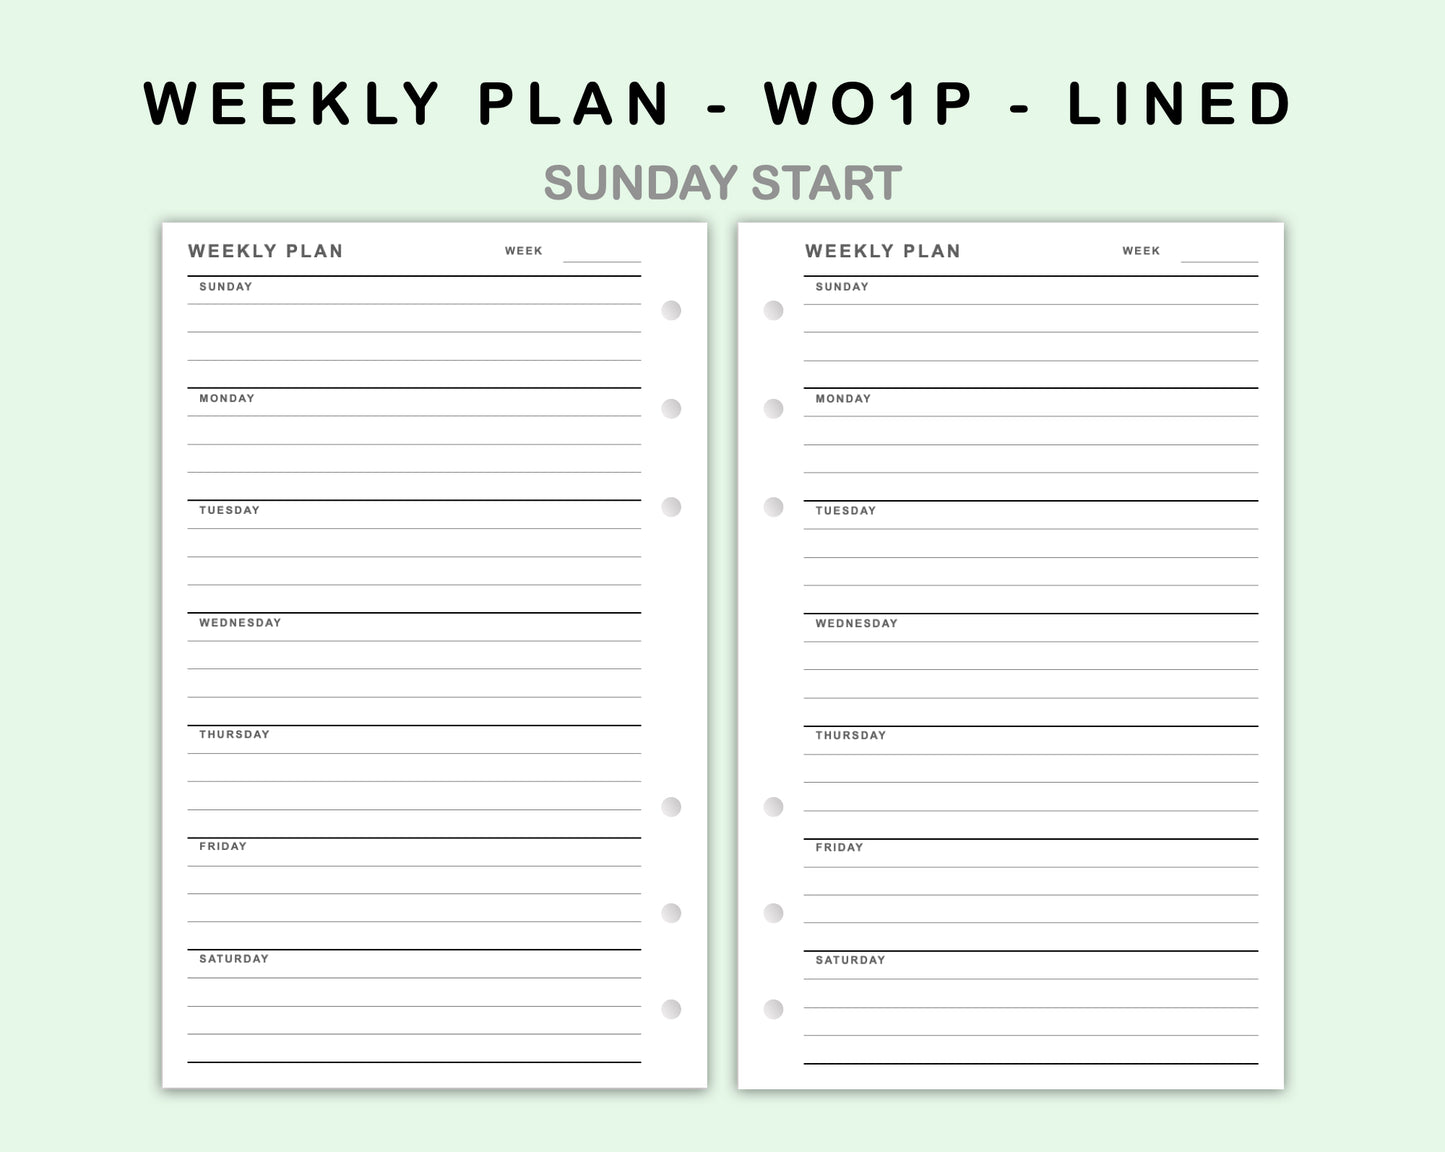 FC Compact Inserts - Weekly Plan - WO1P - Lined